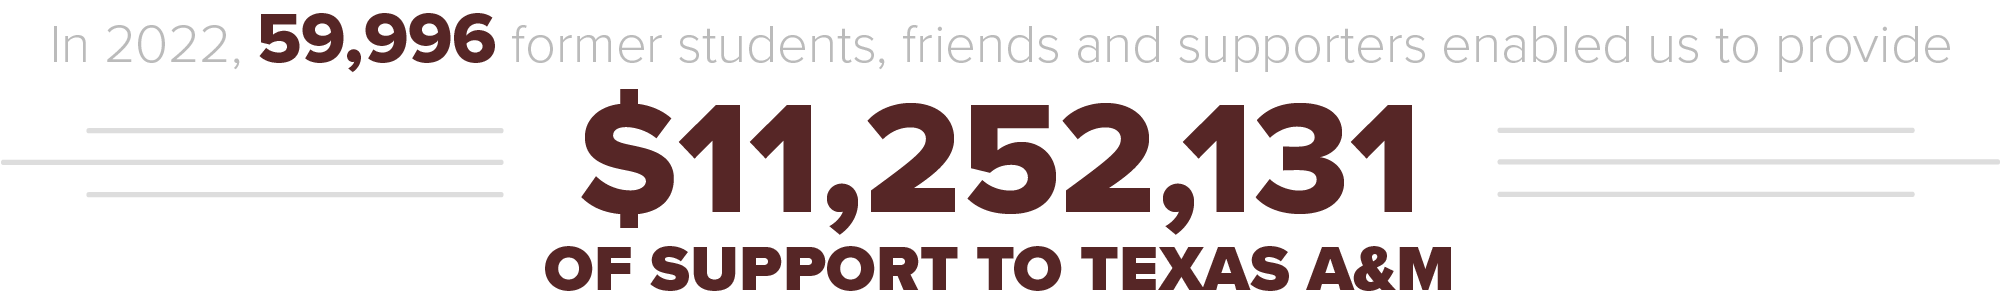 In 2019 60,730 Former Students, friends, and supporters enabled us to provide $15,023,516 of support to Texas A&M